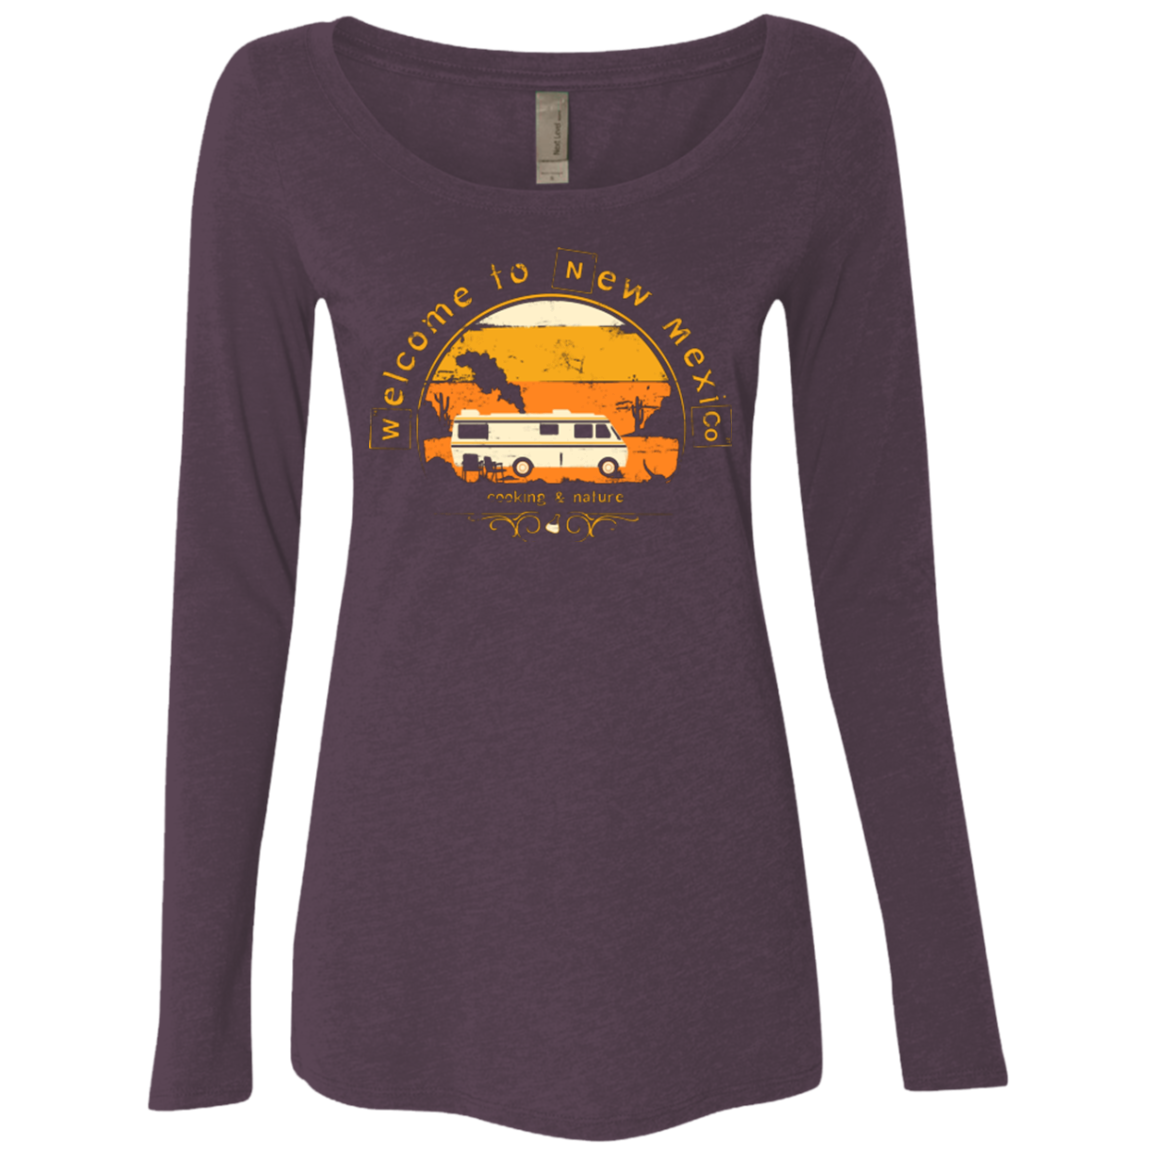 Welcome to New Mexico Women's Triblend Long Sleeve Shirt